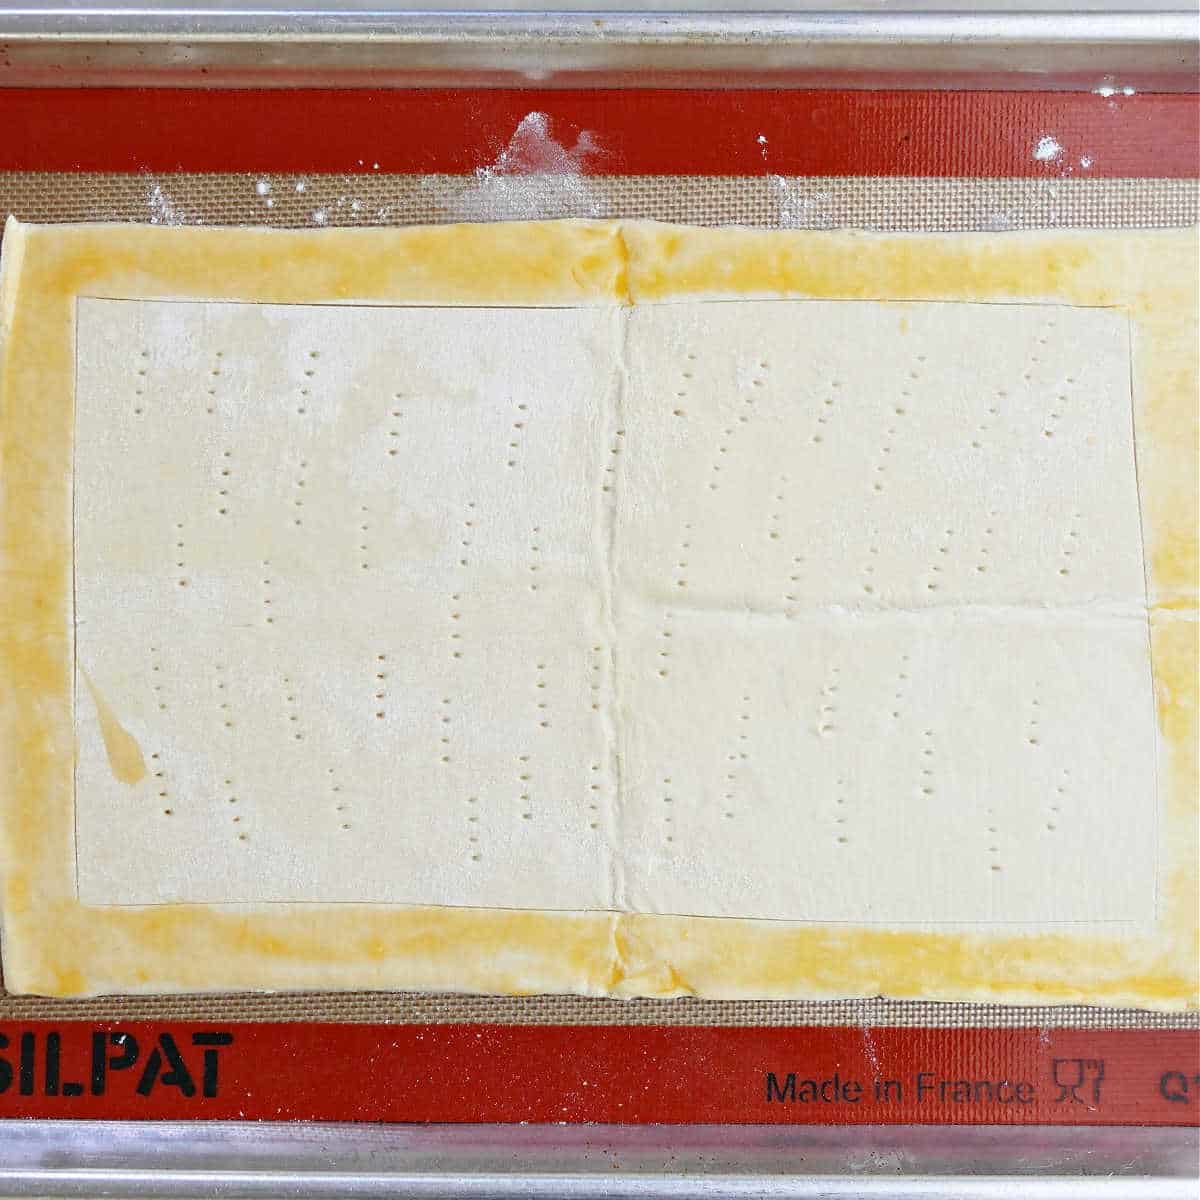 Puff pastry that has been forked on a baking pan.